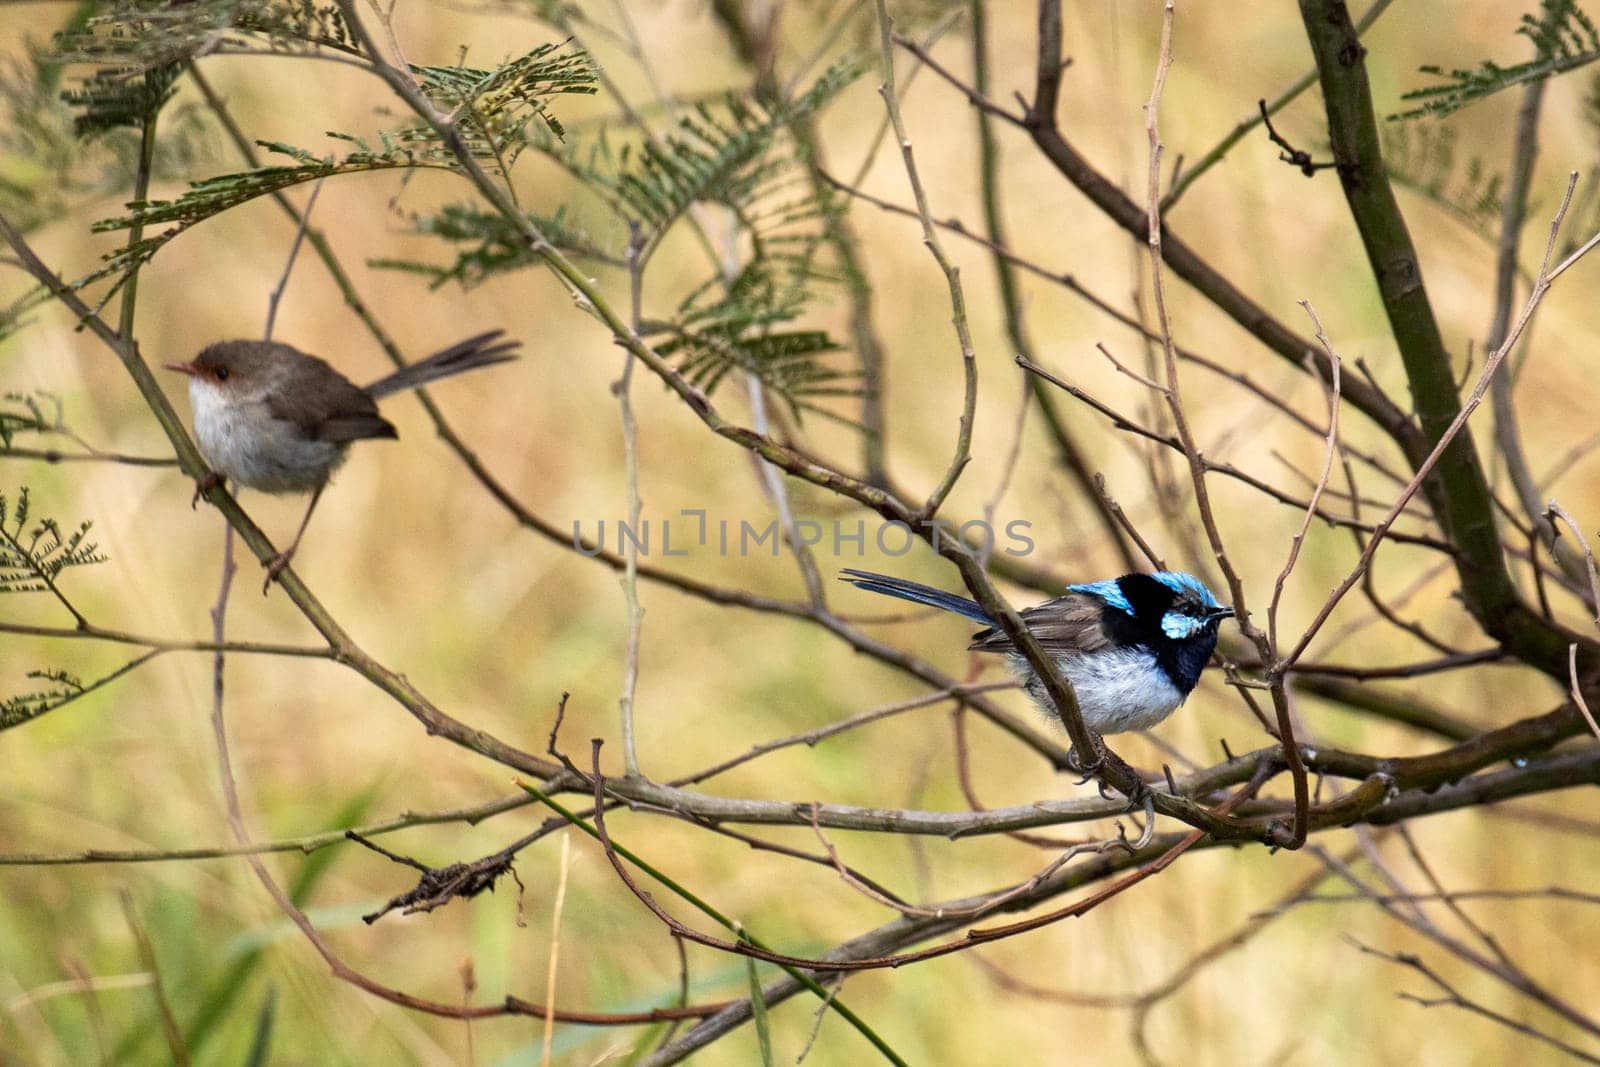 The superb fairywren is a passerine bird in the Australasian wren family, Maluridae, and is common and familiar across south eastern Australia.